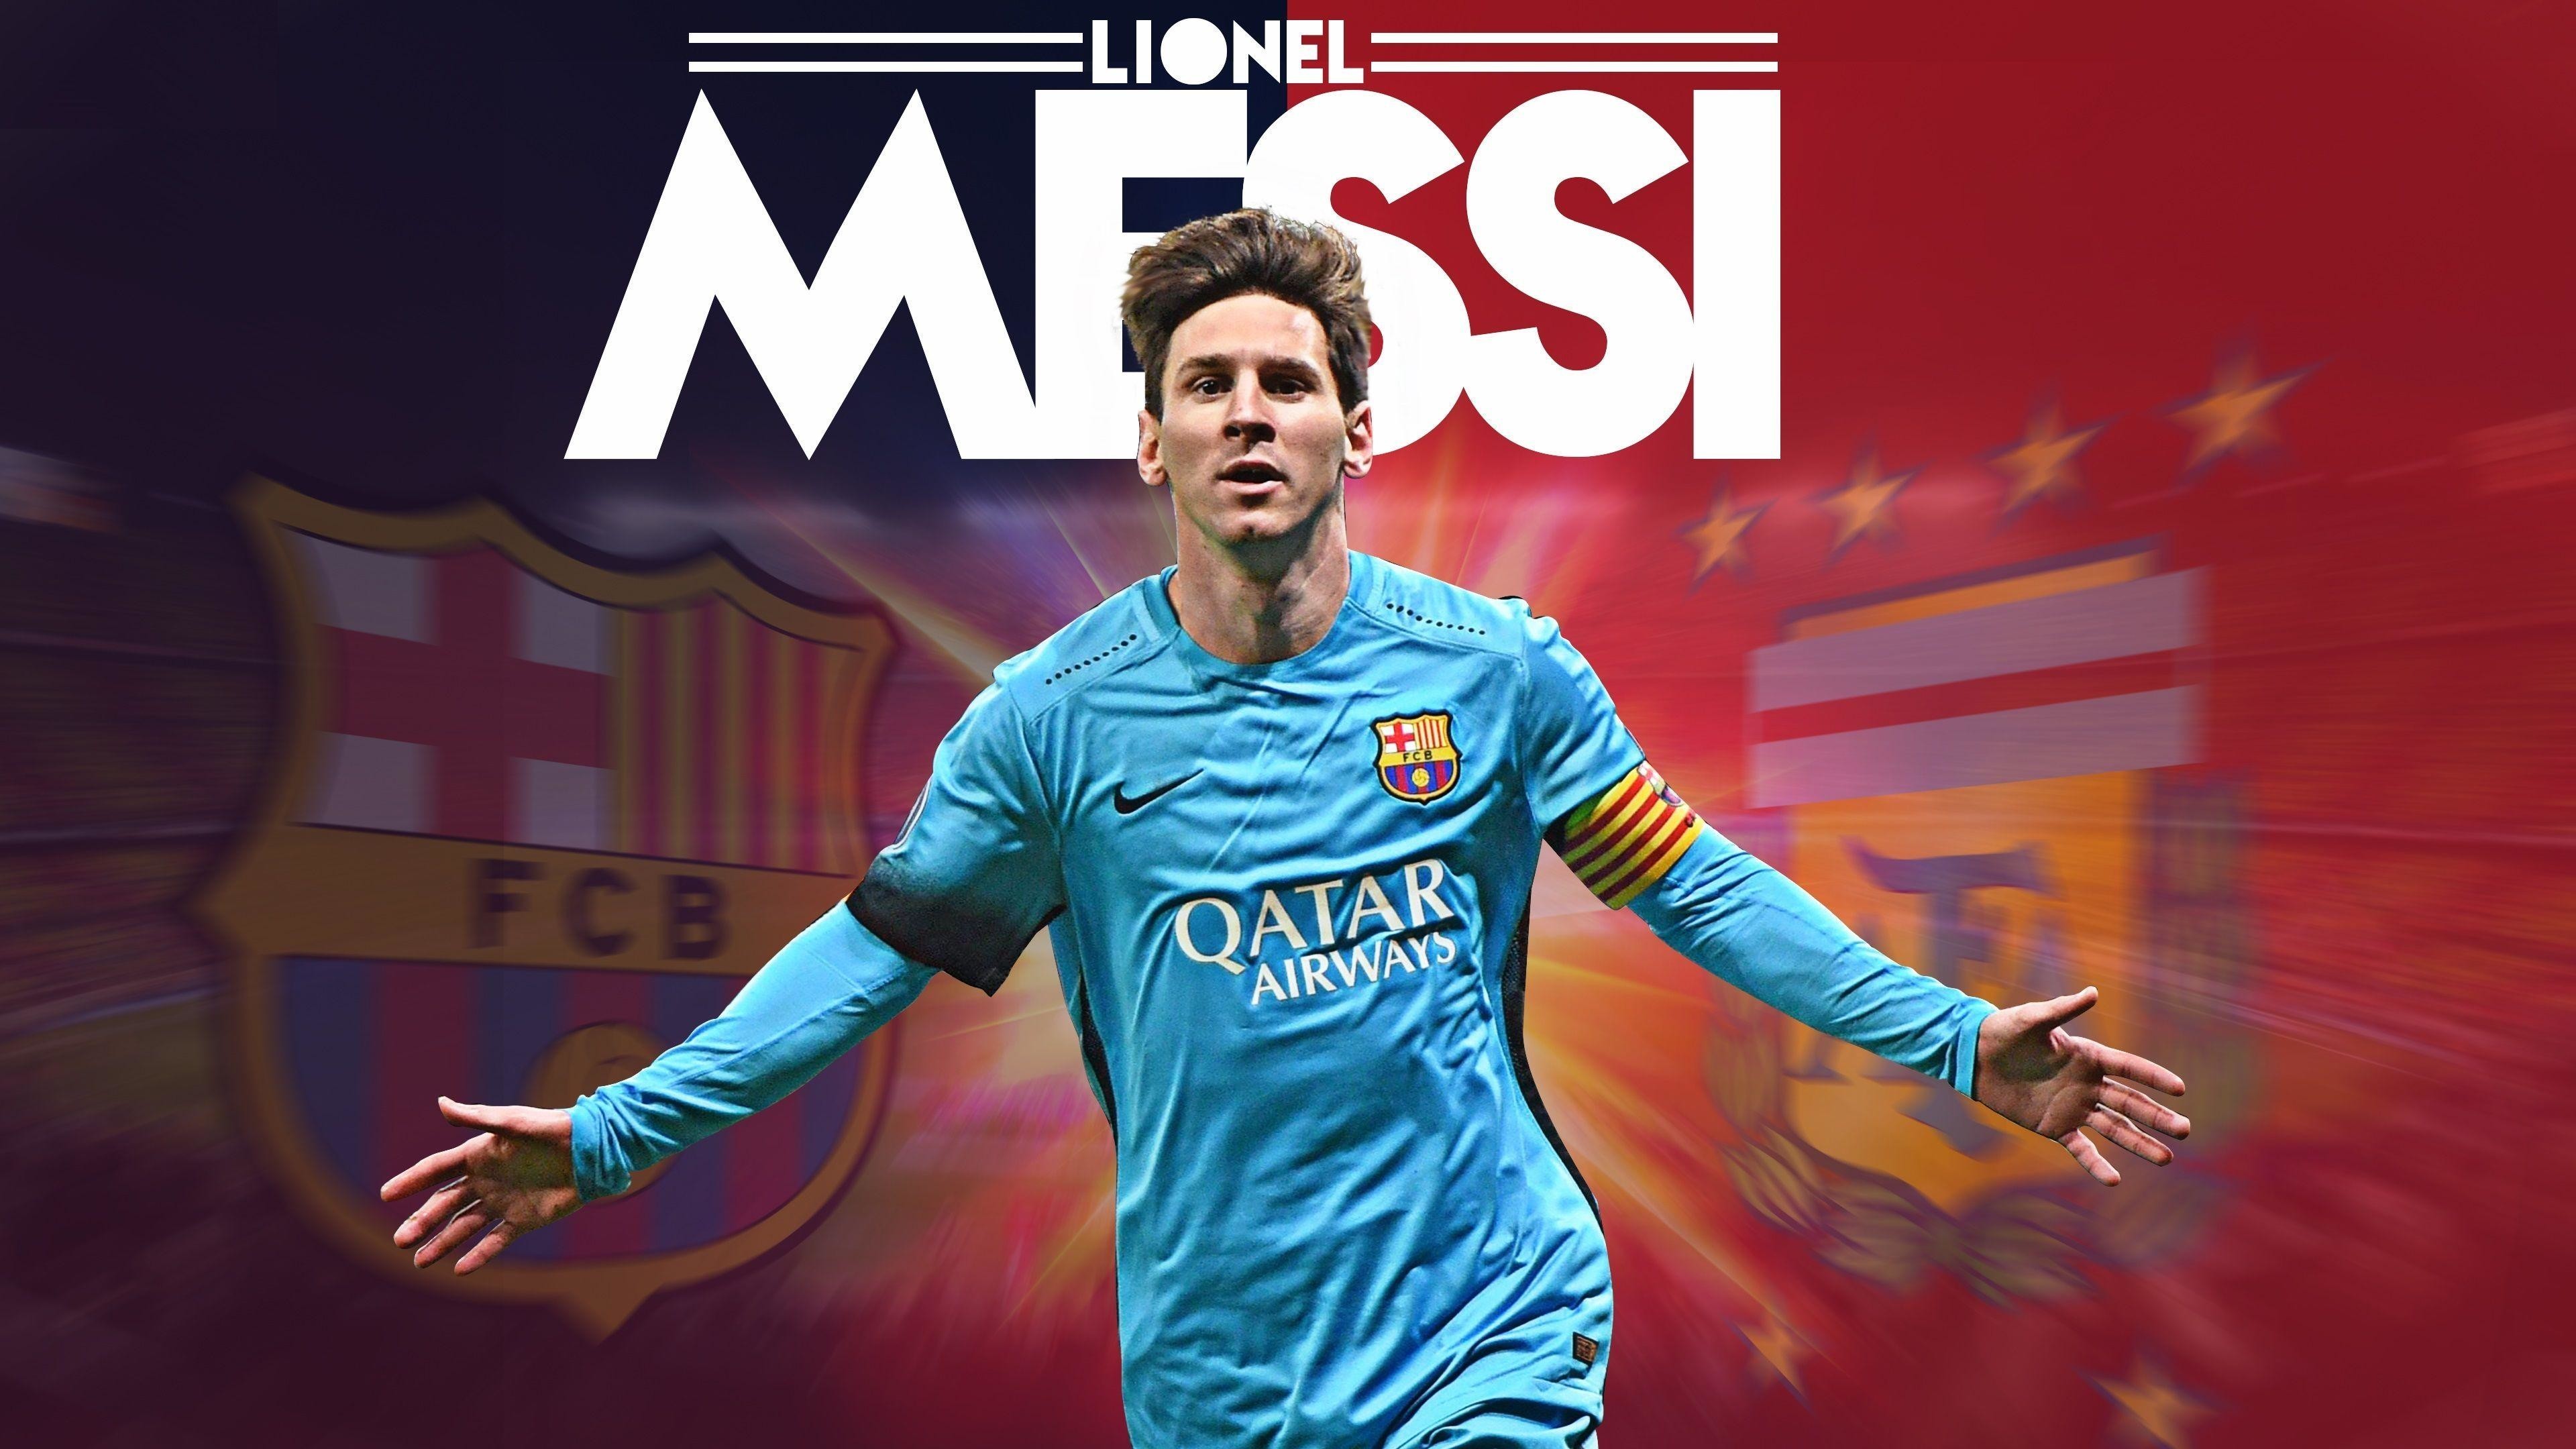 Football player Lionel Messi in blue on the pitch Desktop wallpapers  1920x1200